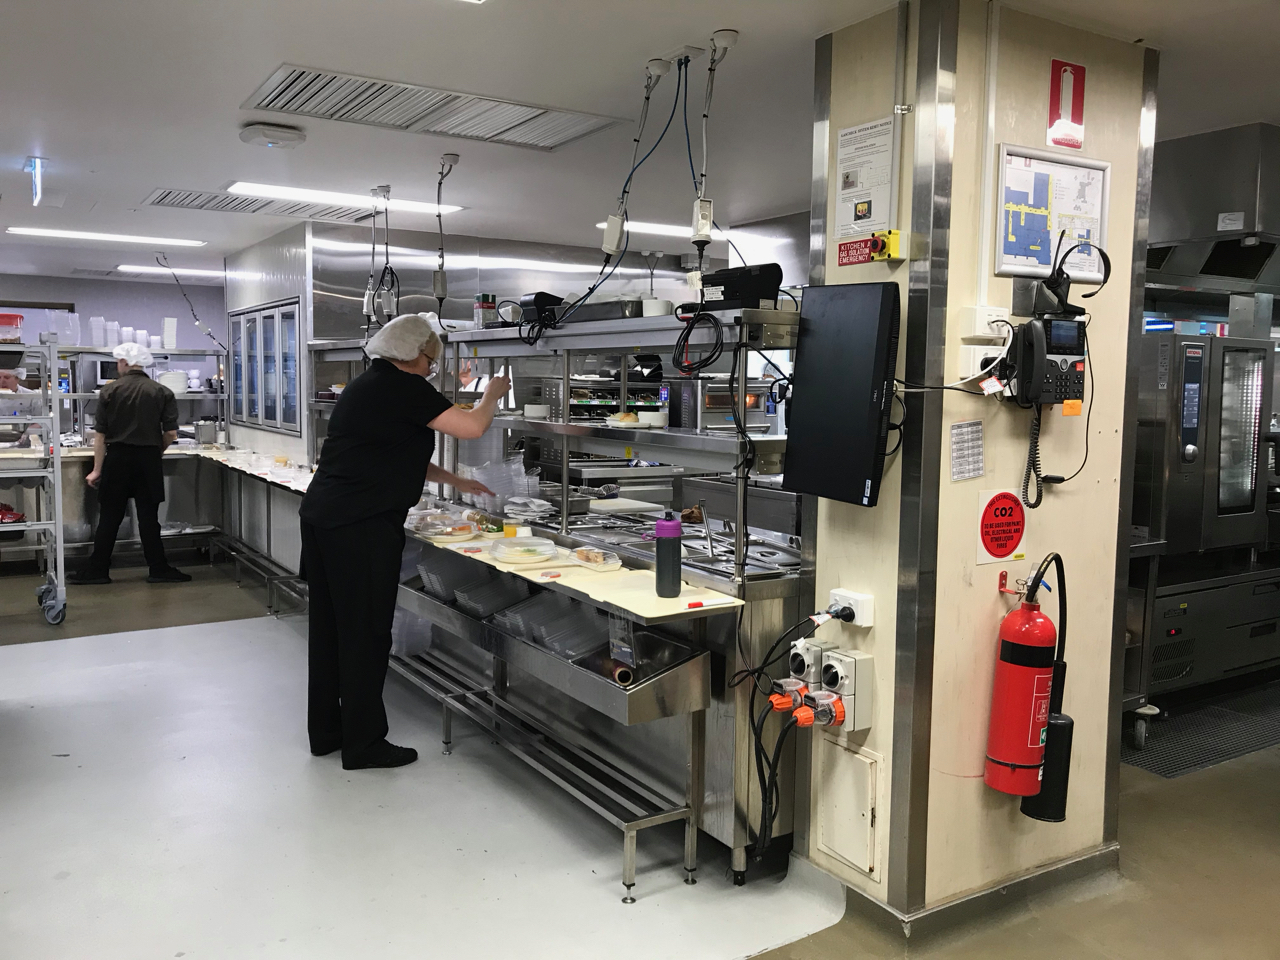 Slice of Perth – You won’t believe the food this hospital serves